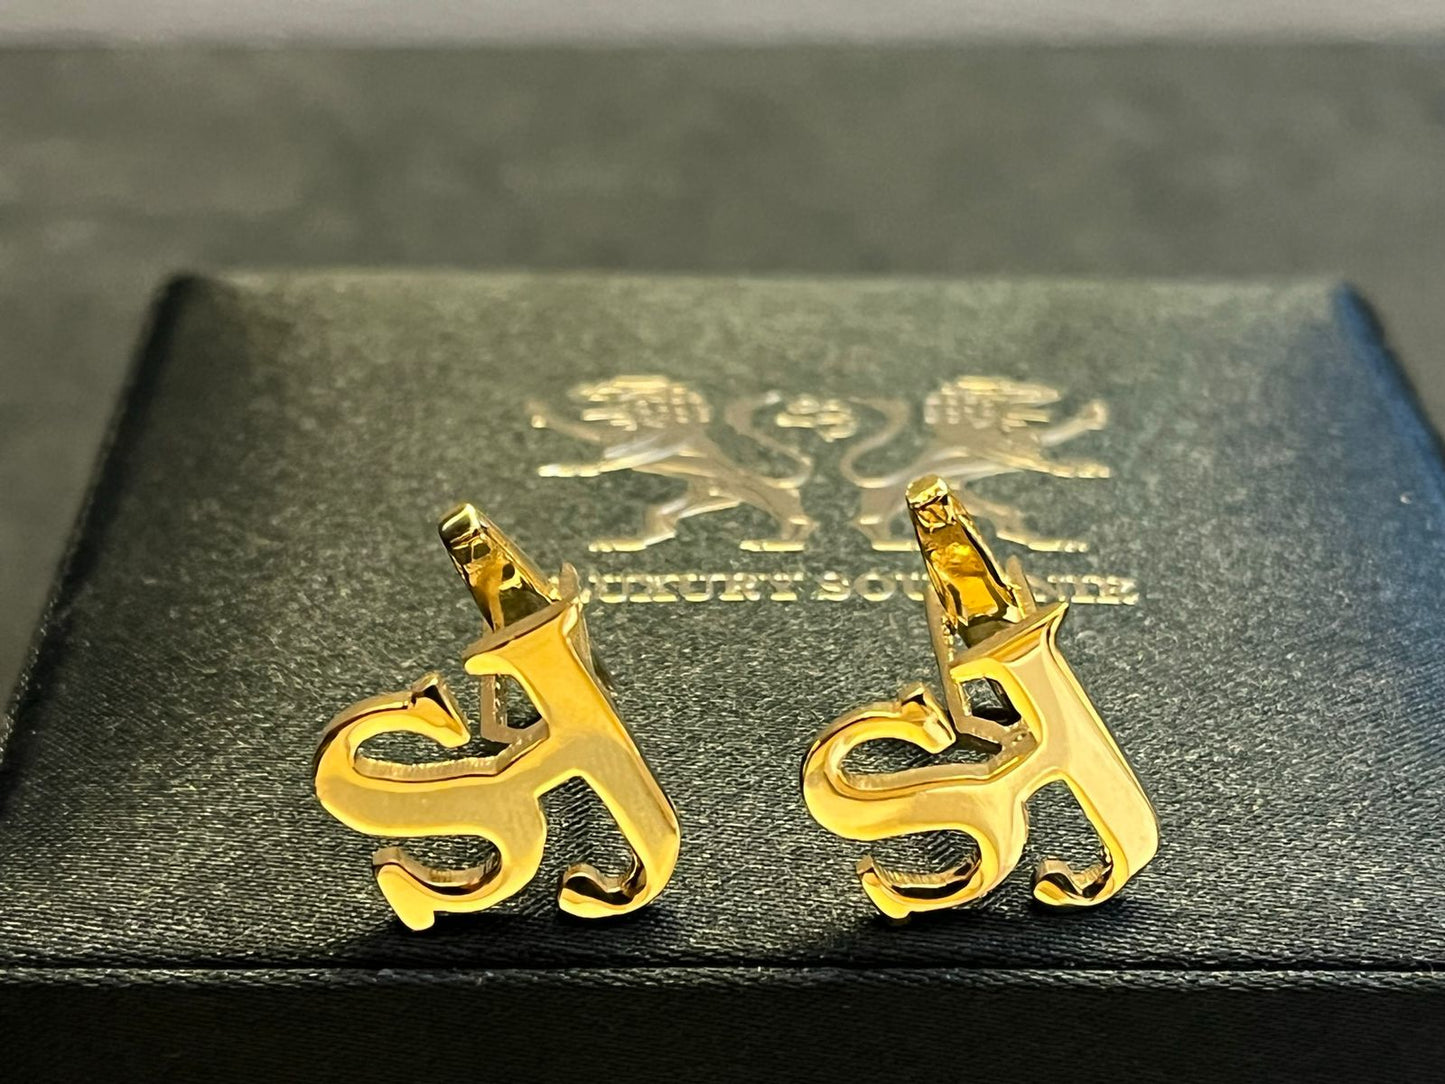 Monogrammed Cufflinks Custom Made Handcrafted in 925 Silver - 24Kt Gold Plated Finish.